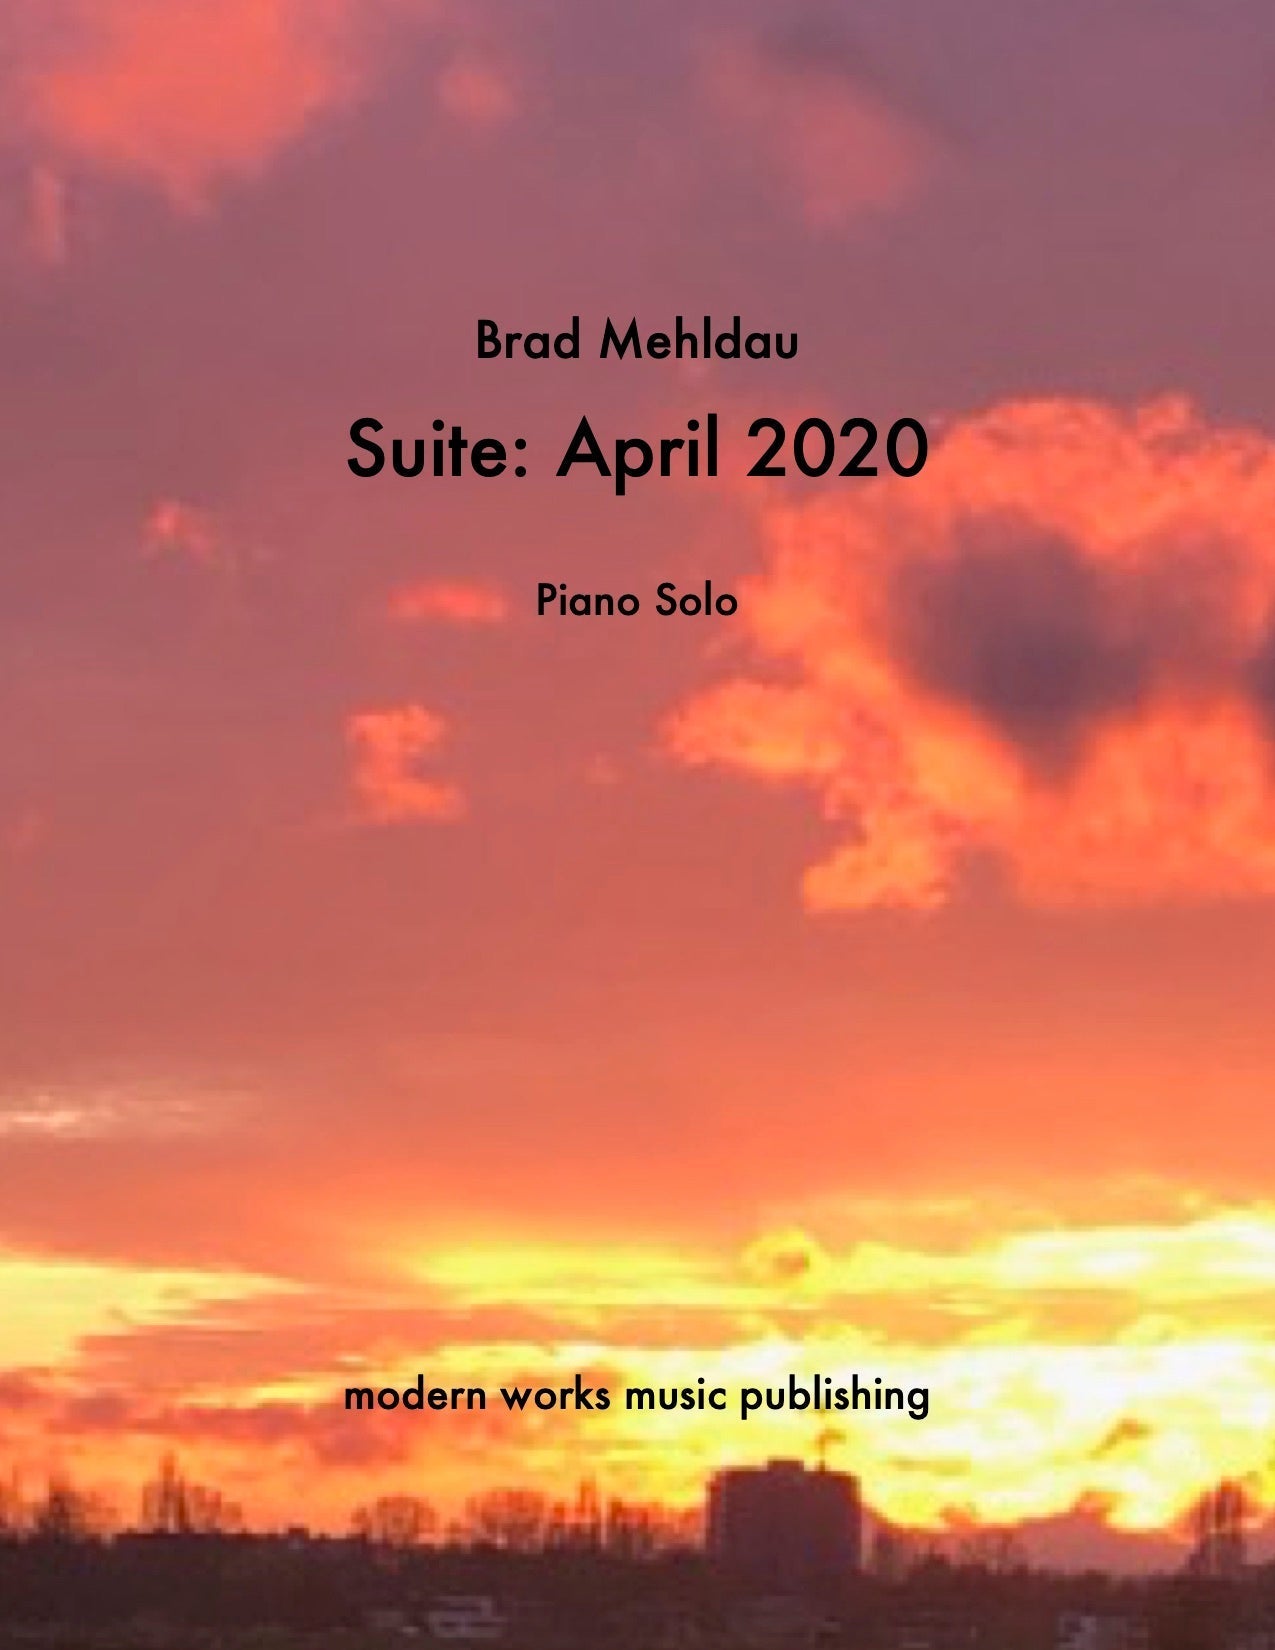 The Day Moves By from Suite: April 2020